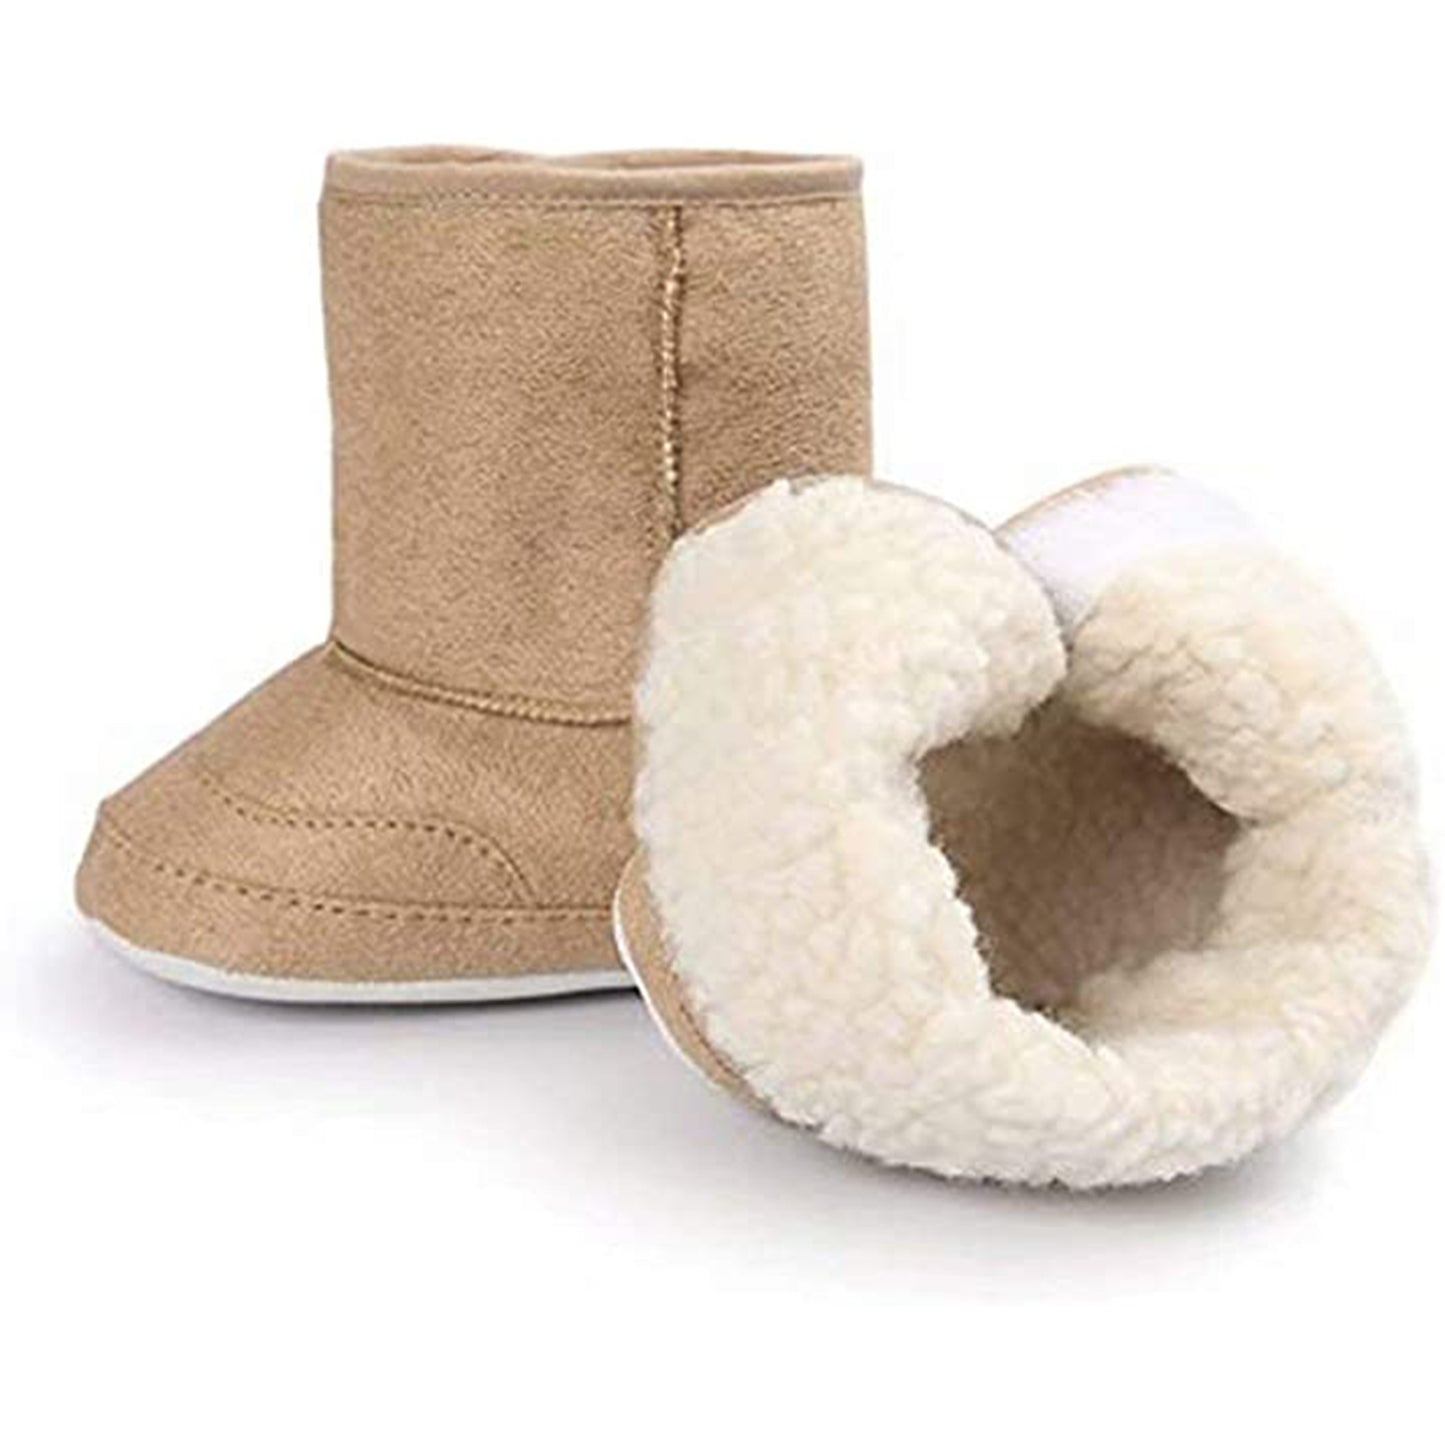 KAUACH Toddler Boots Soft Anti-Slip Sole Winter Boots for Infant Baby Girls